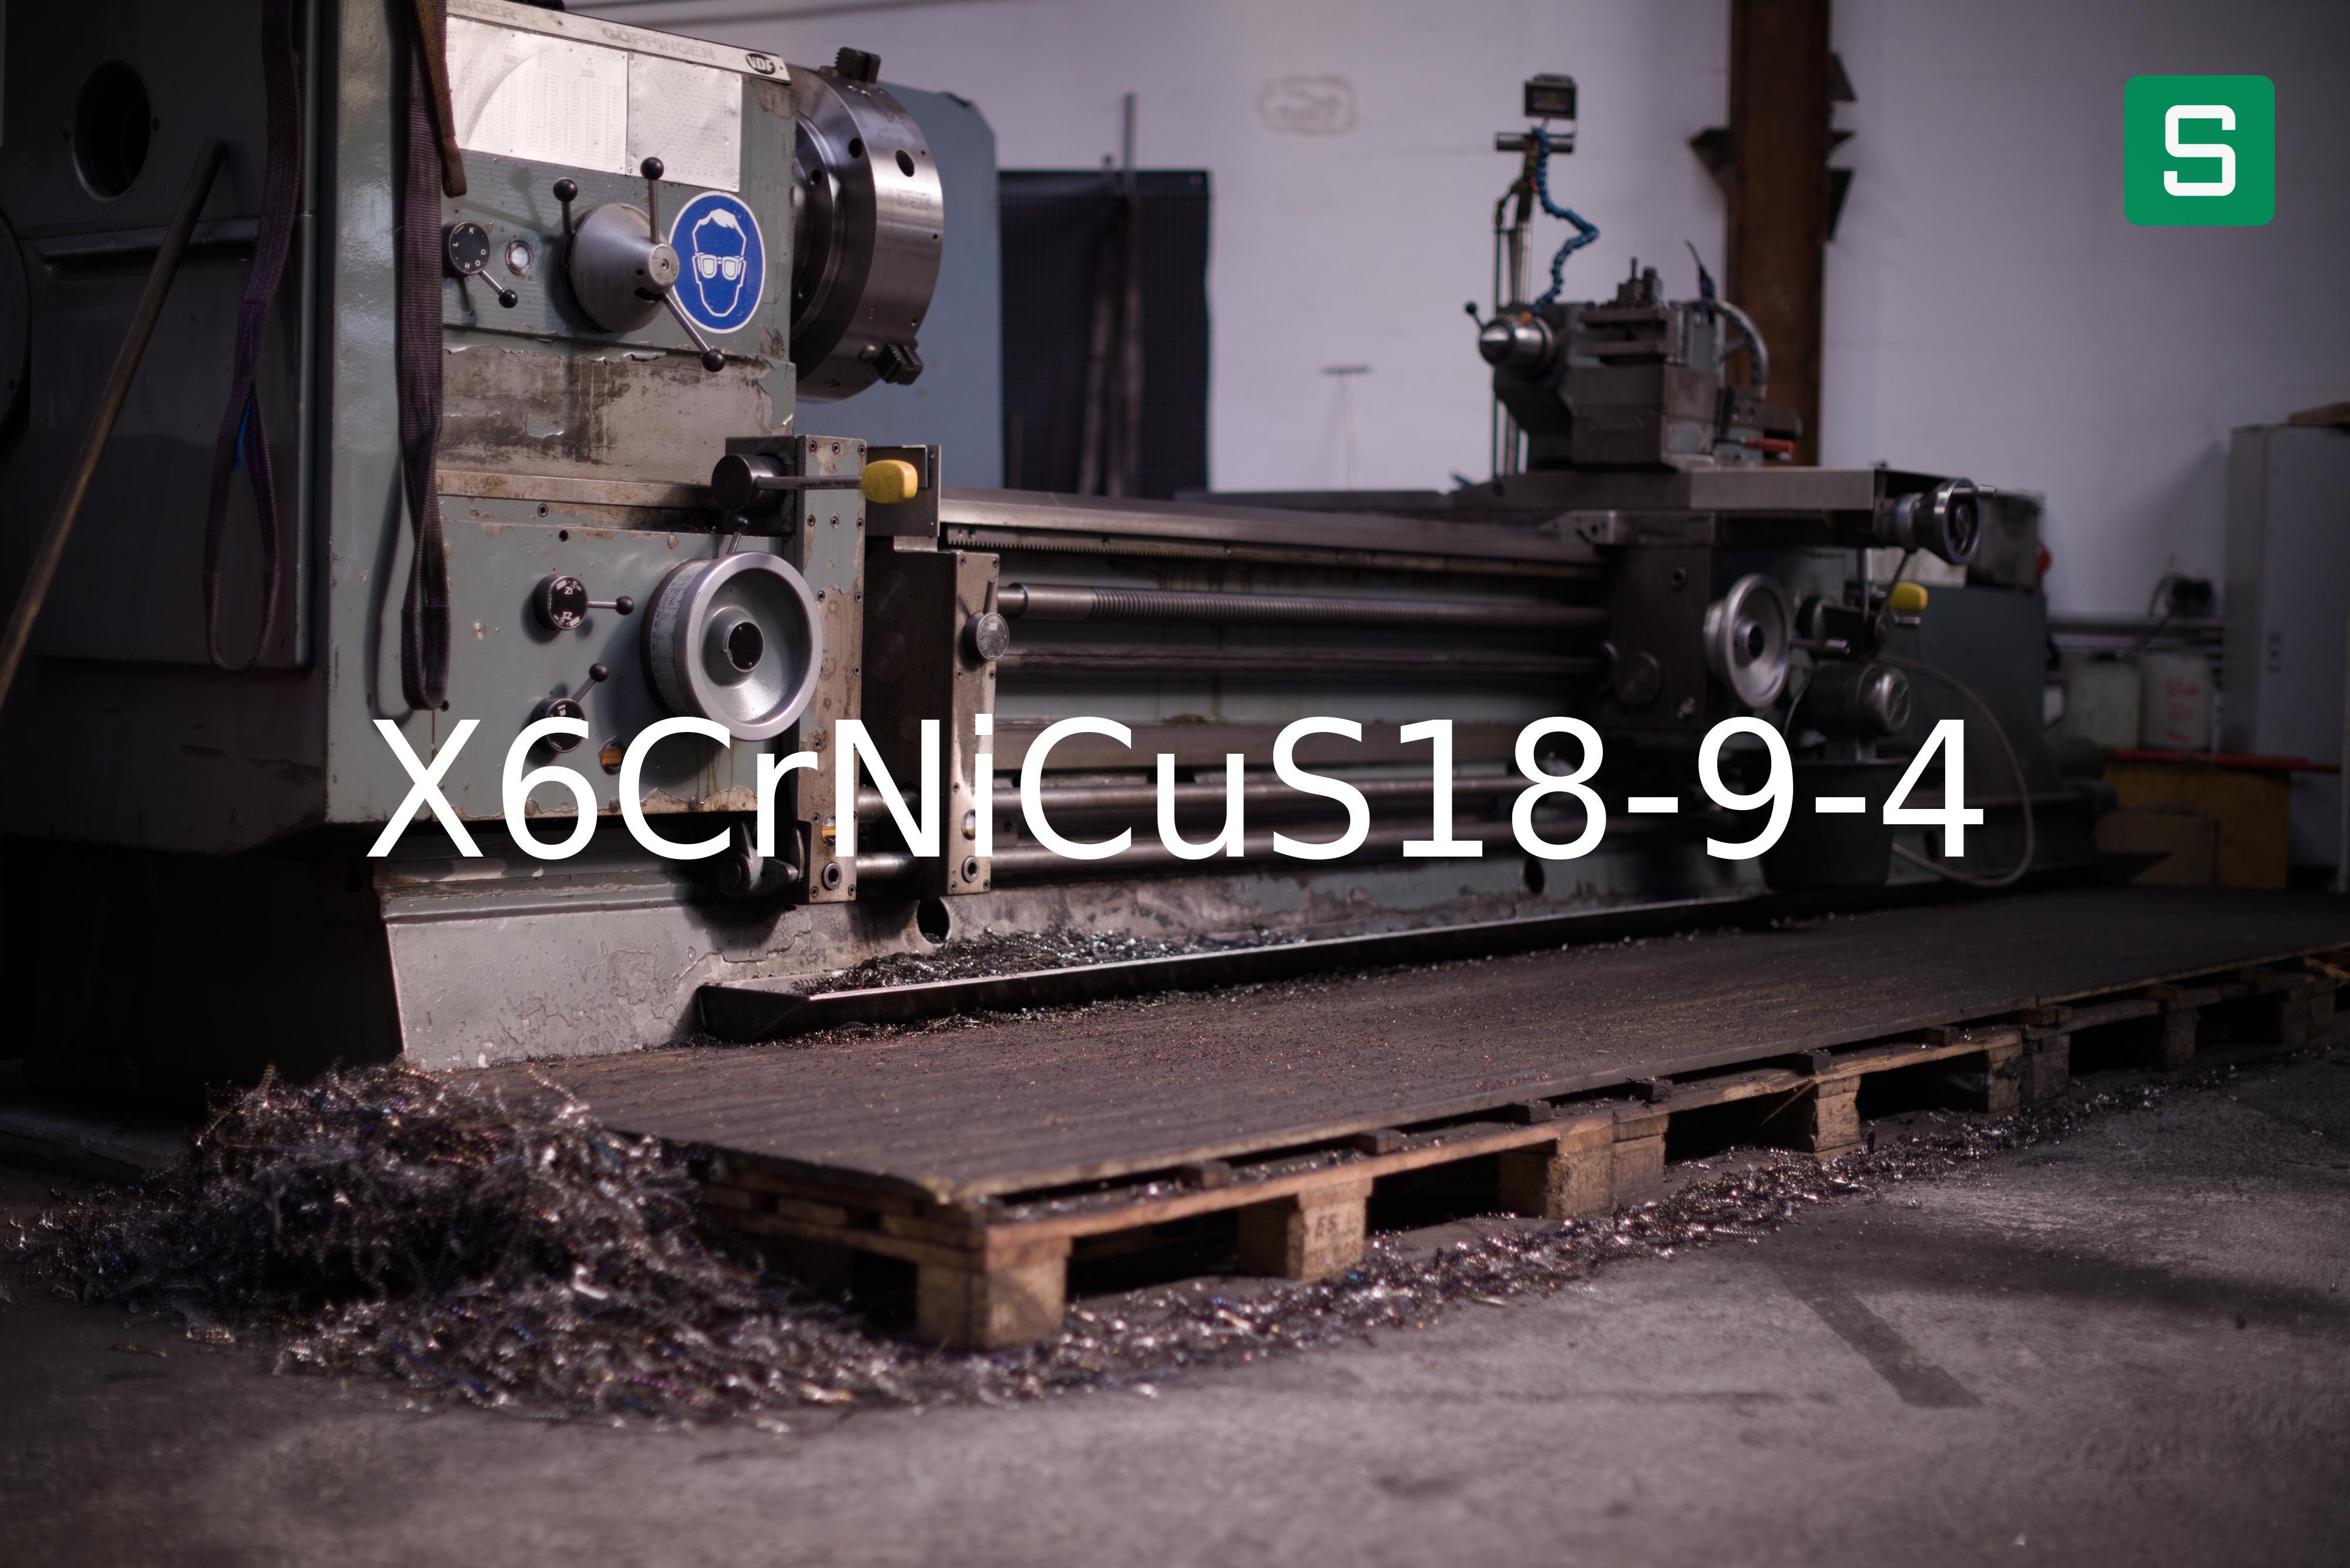 Steel Material: X6CrNiCuS18-9-4